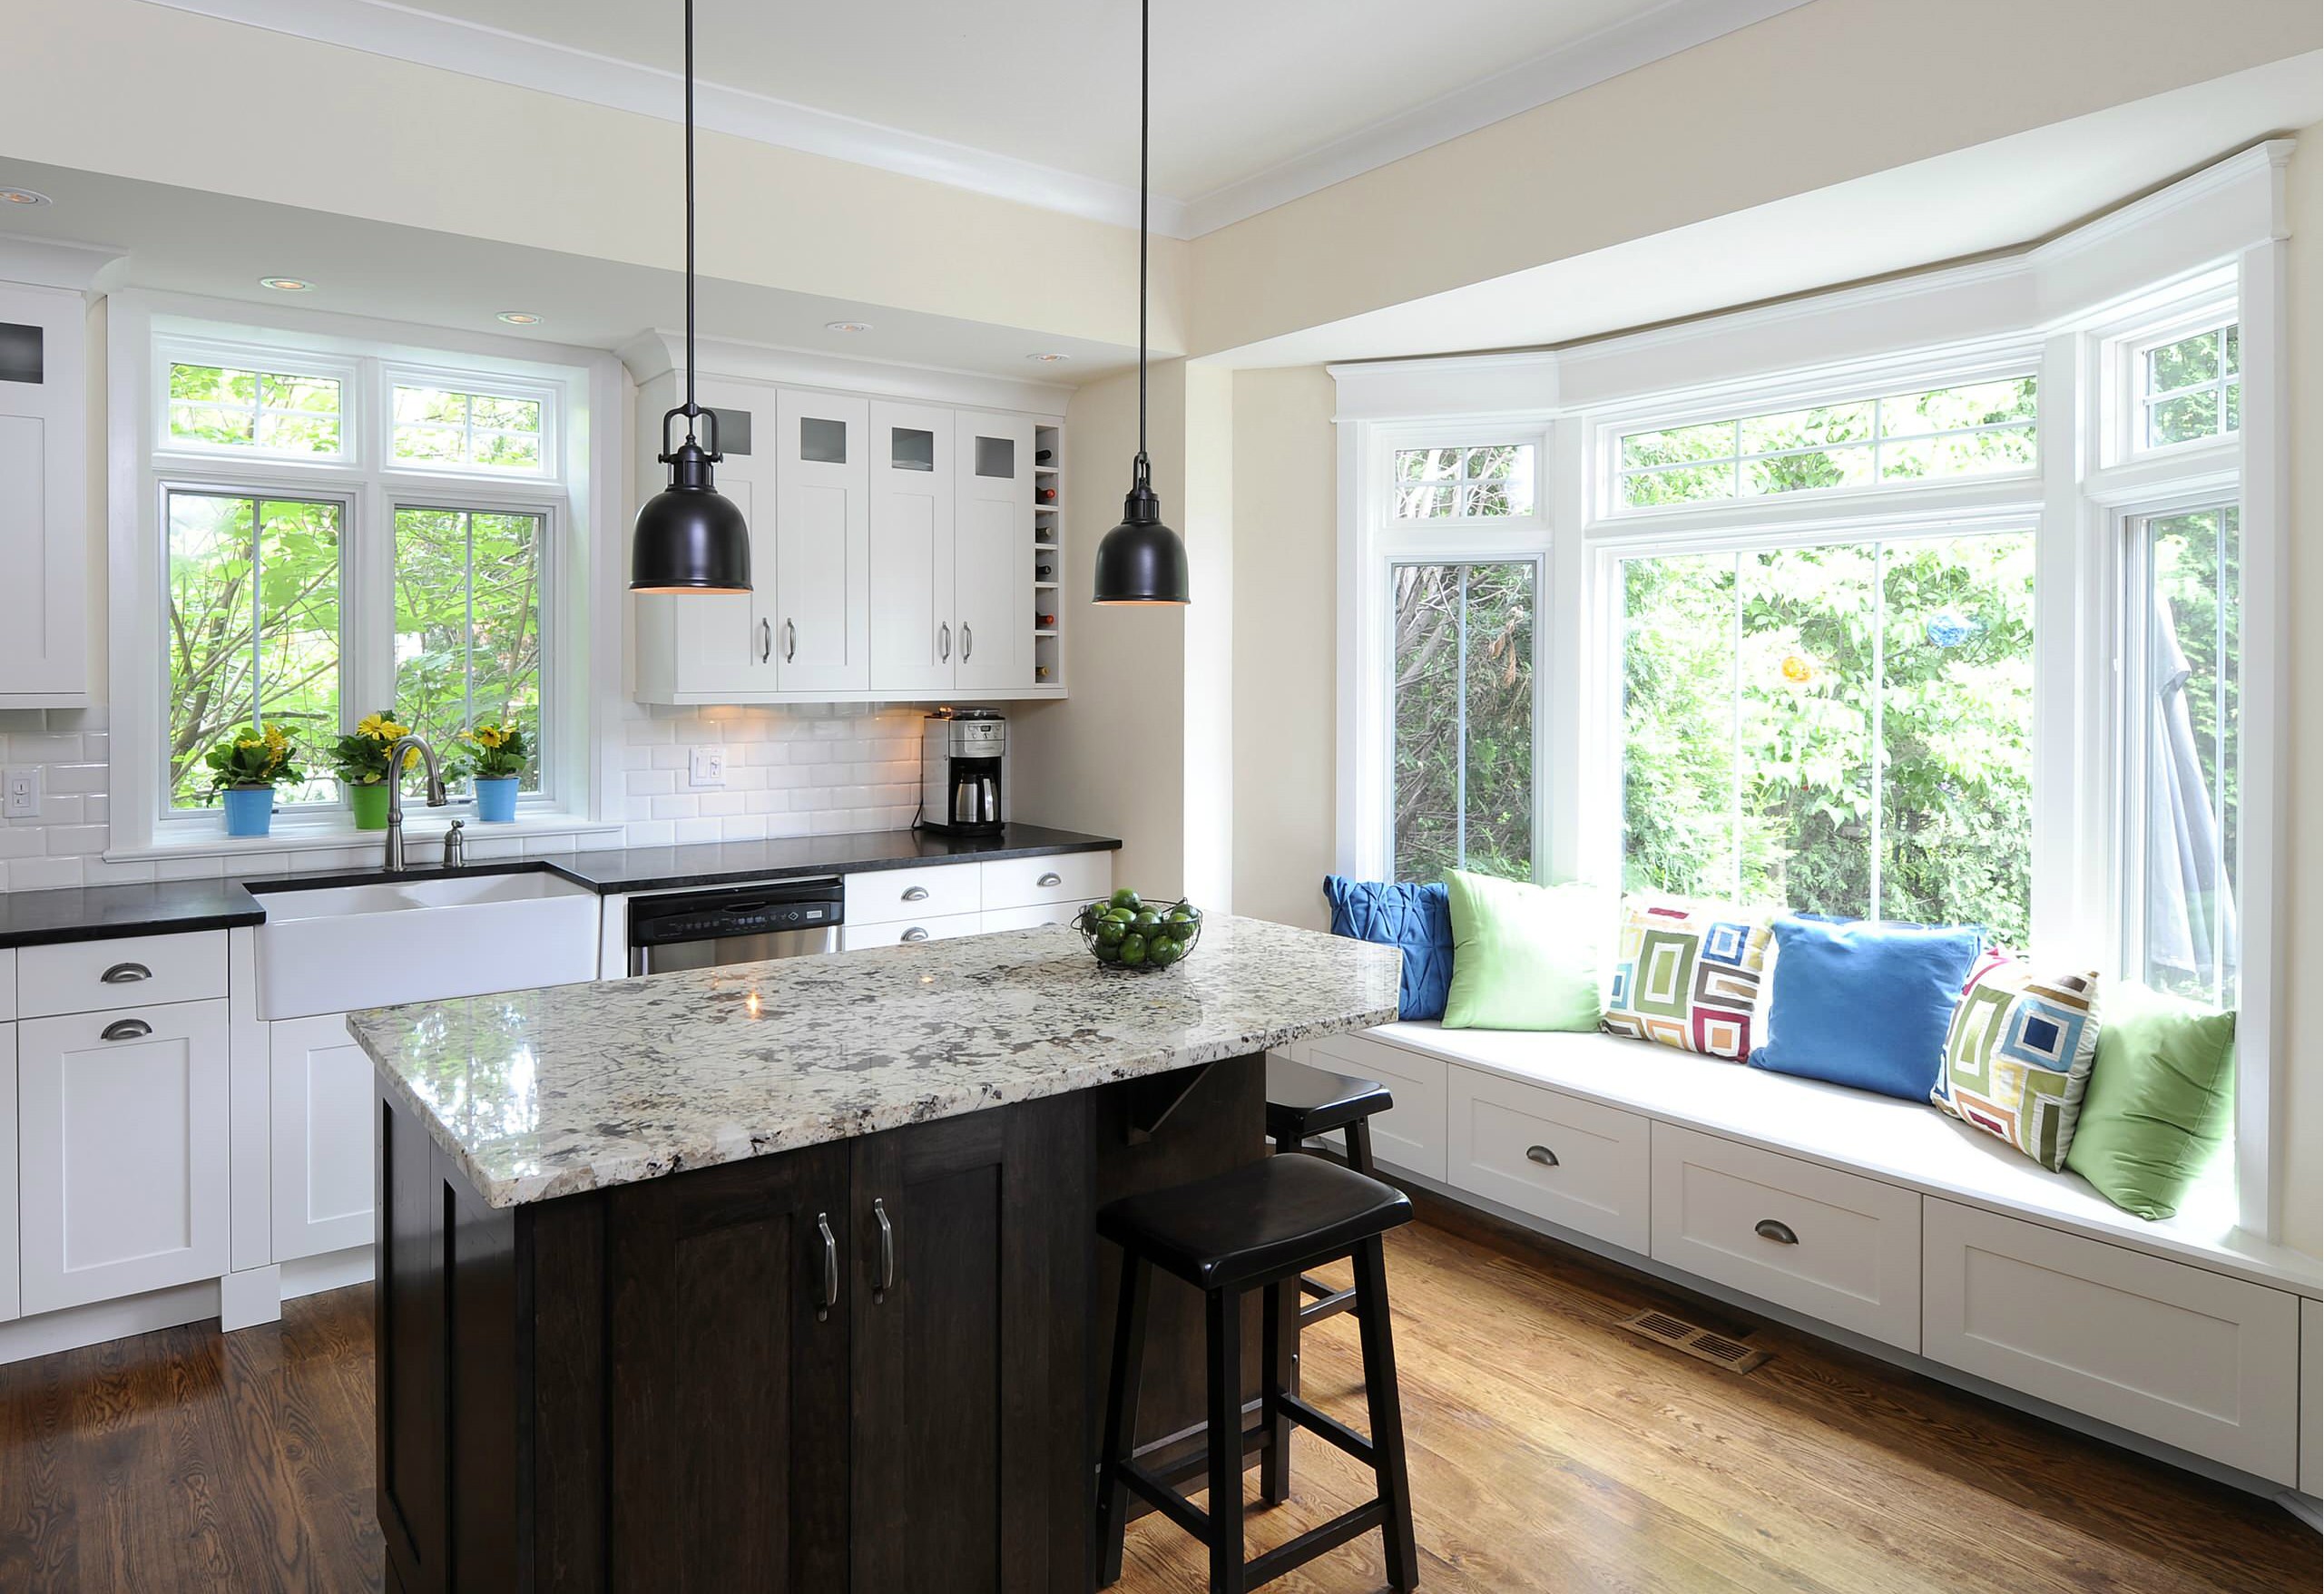 Gorgeous bay window seat with white shaker cabinets and transom windows plus black kitchen island and granite countertops also pendant lighting and wood floor